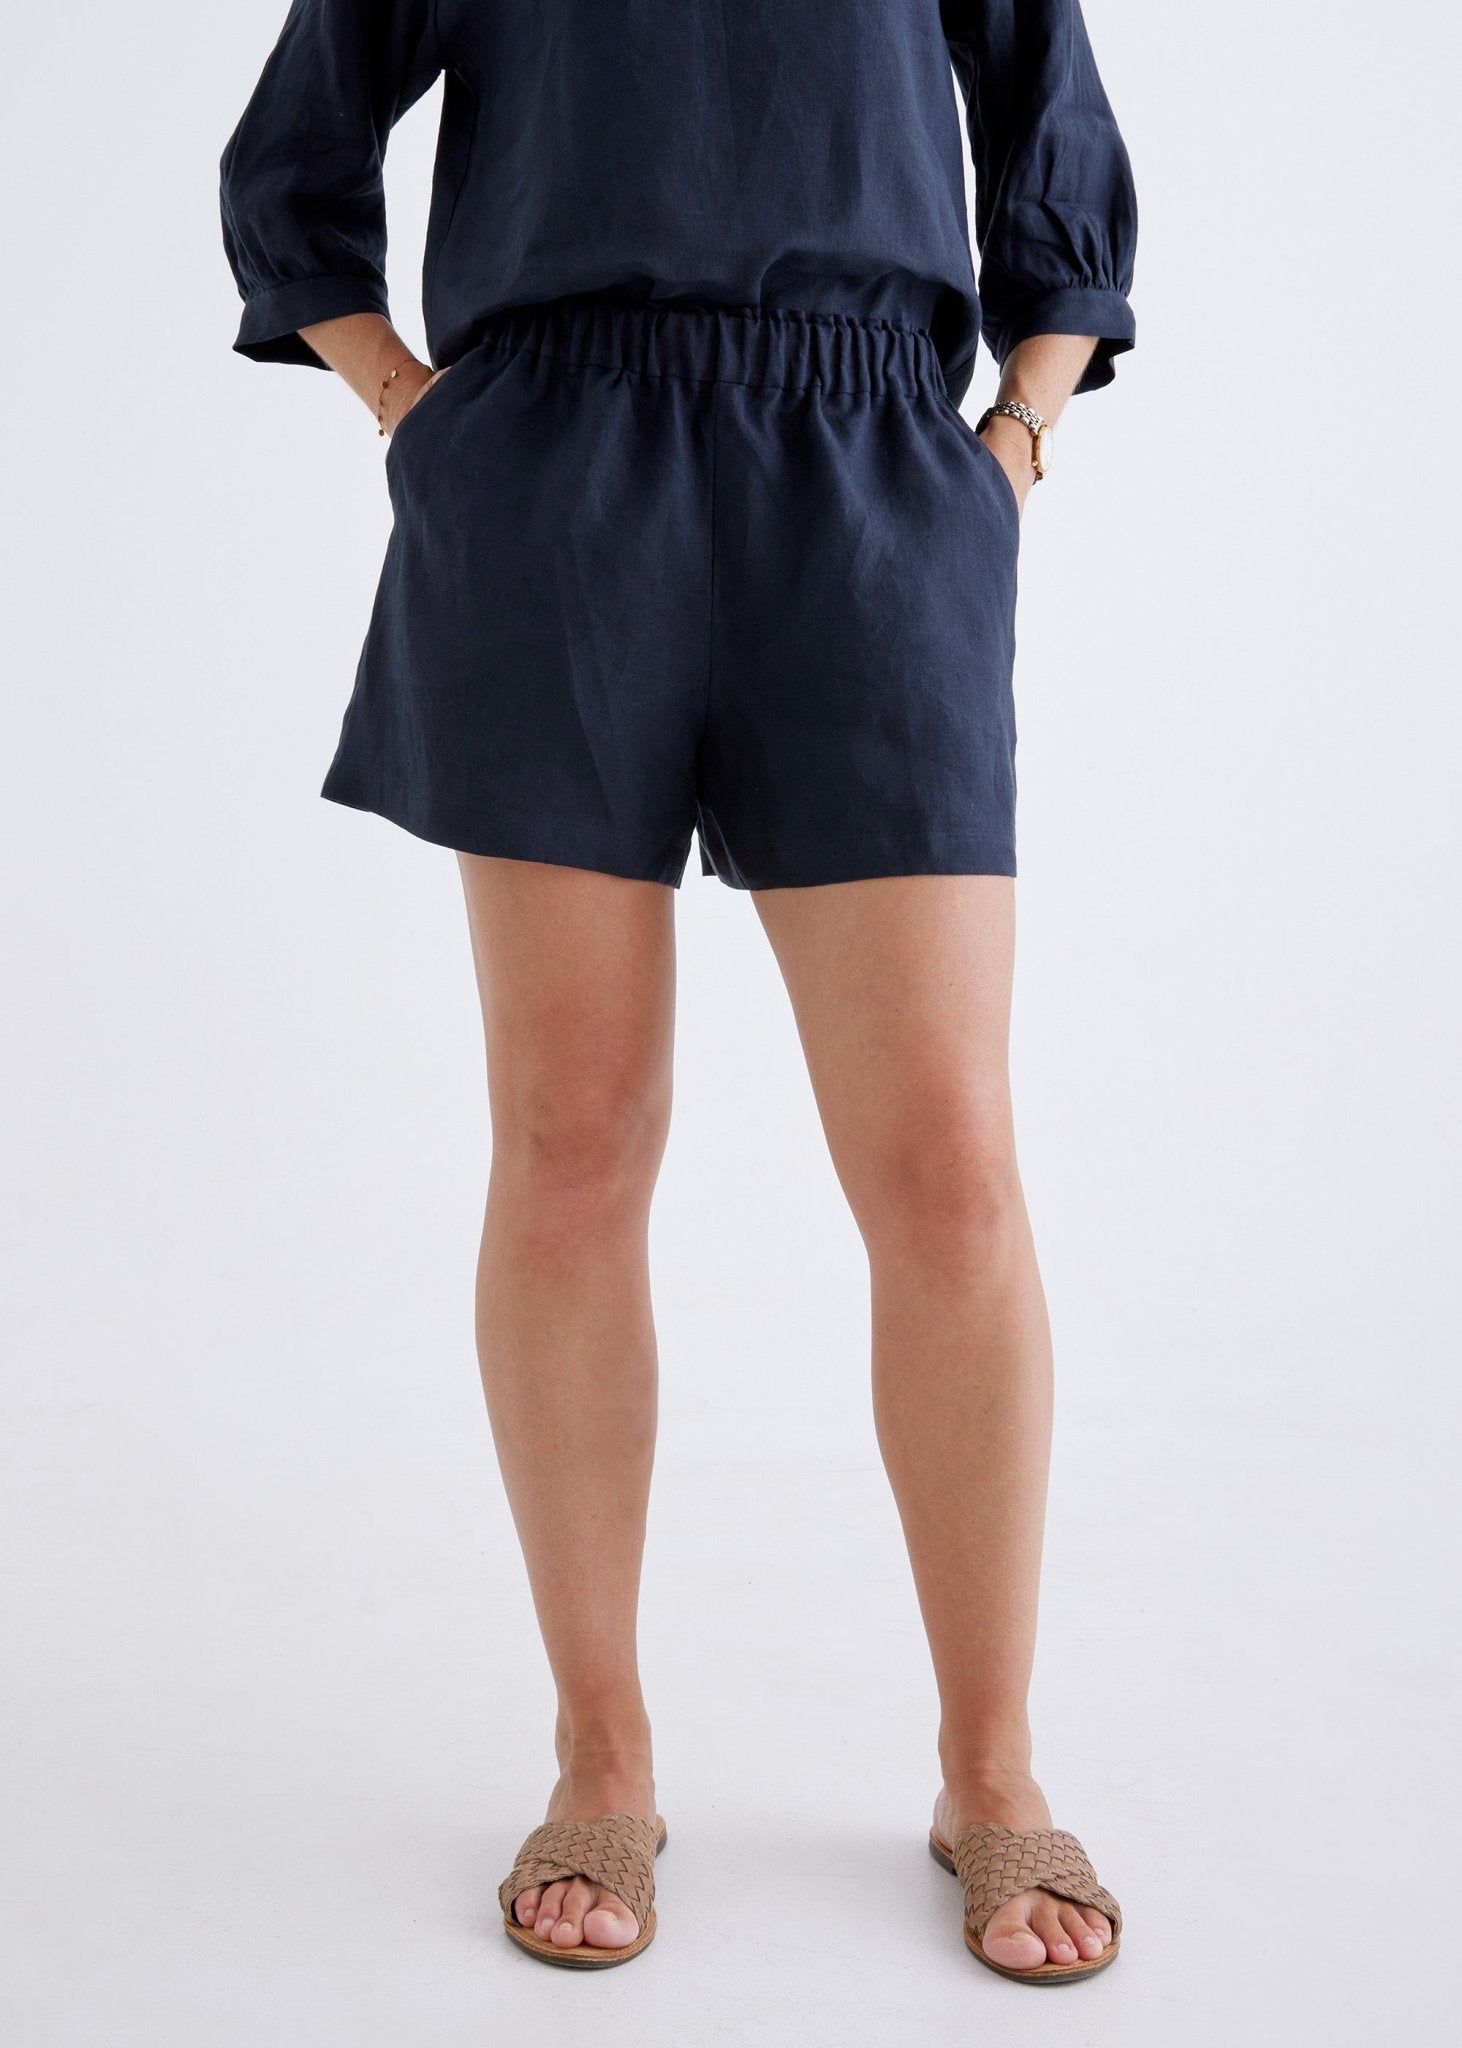 Marley Linen Shorts in Navy-Devina Louise-stride